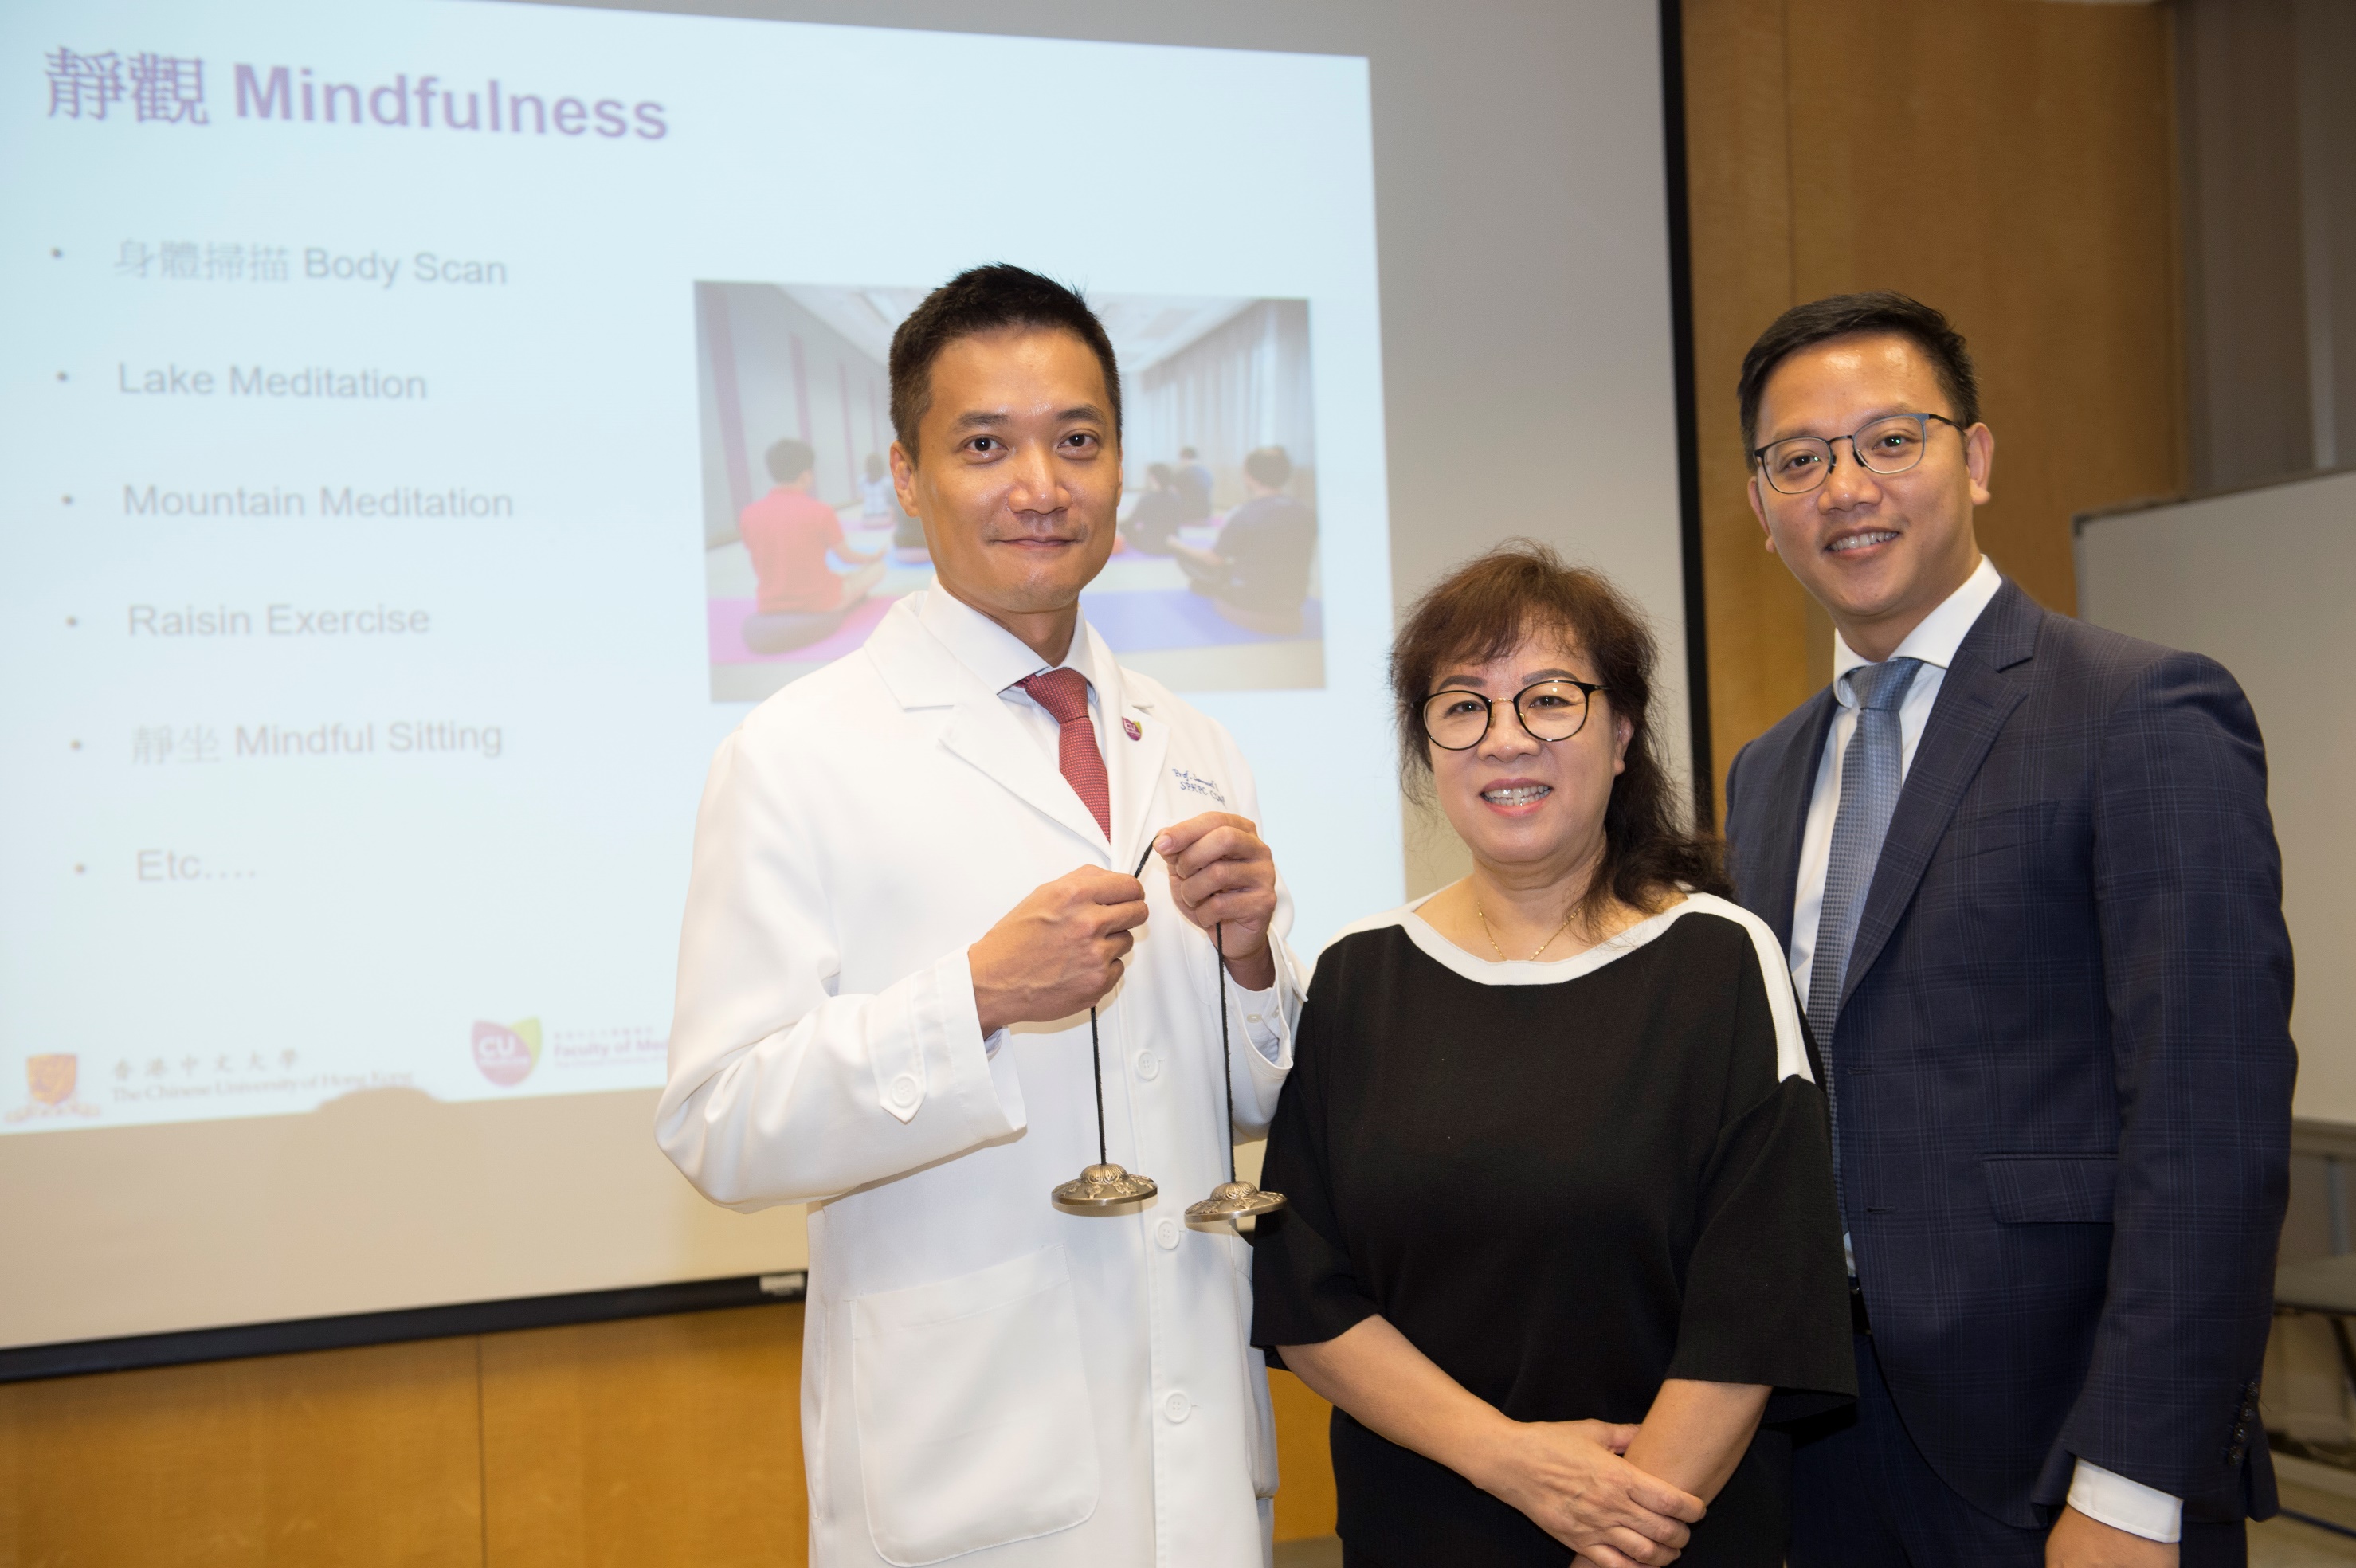  A research from the Faculty of Medicine at CUHK has suggested that behavioural activation with mindfulness could help prevent major depression with incidence rate reduced by half. (From left: Professor Samuel Yeung Shan WONG, from The Jockey Club School of Public Health and Primary Care, Faculty of Medicine, CUHK; Ms FUNG, participant of the study; and Dr. Benjamin Hon-kei YIP, Assistant Professor of The Jockey Club School of Public Health and Primary Care, Faculty of Medicine, CUHK)